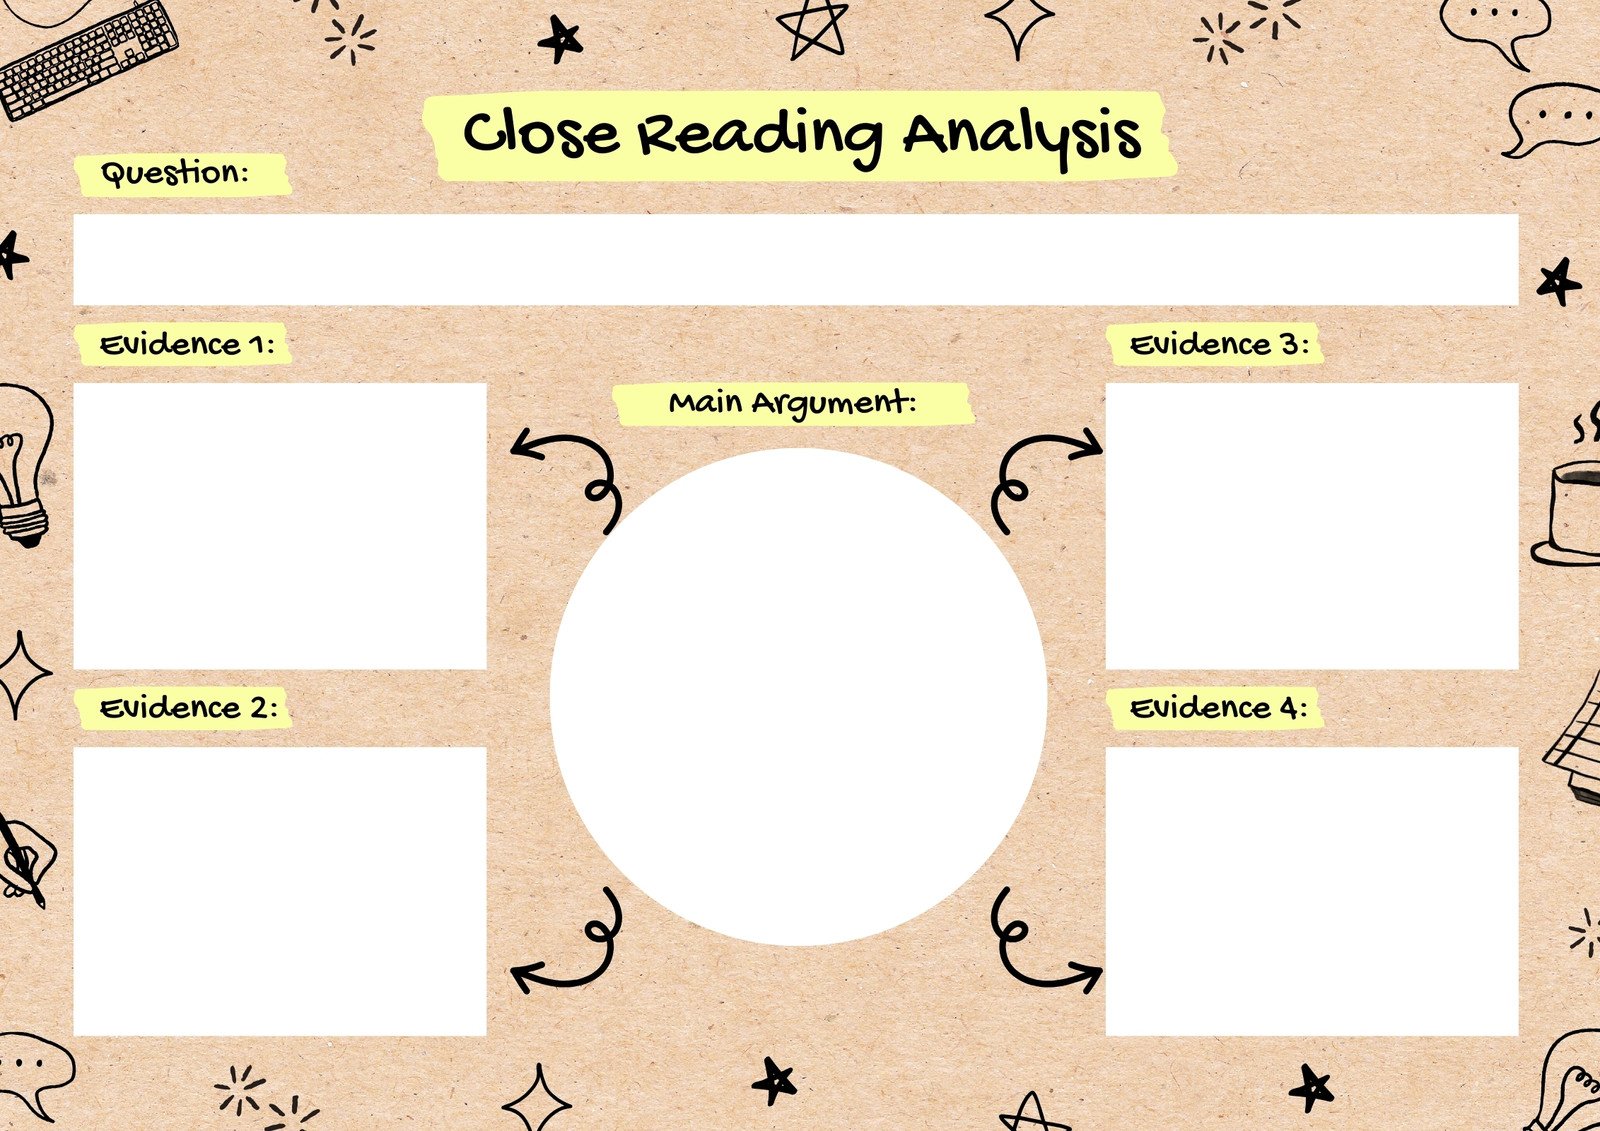 Close Reading Analysis Graphic Organiser in Yellow Brown Cardboard Doodle Style